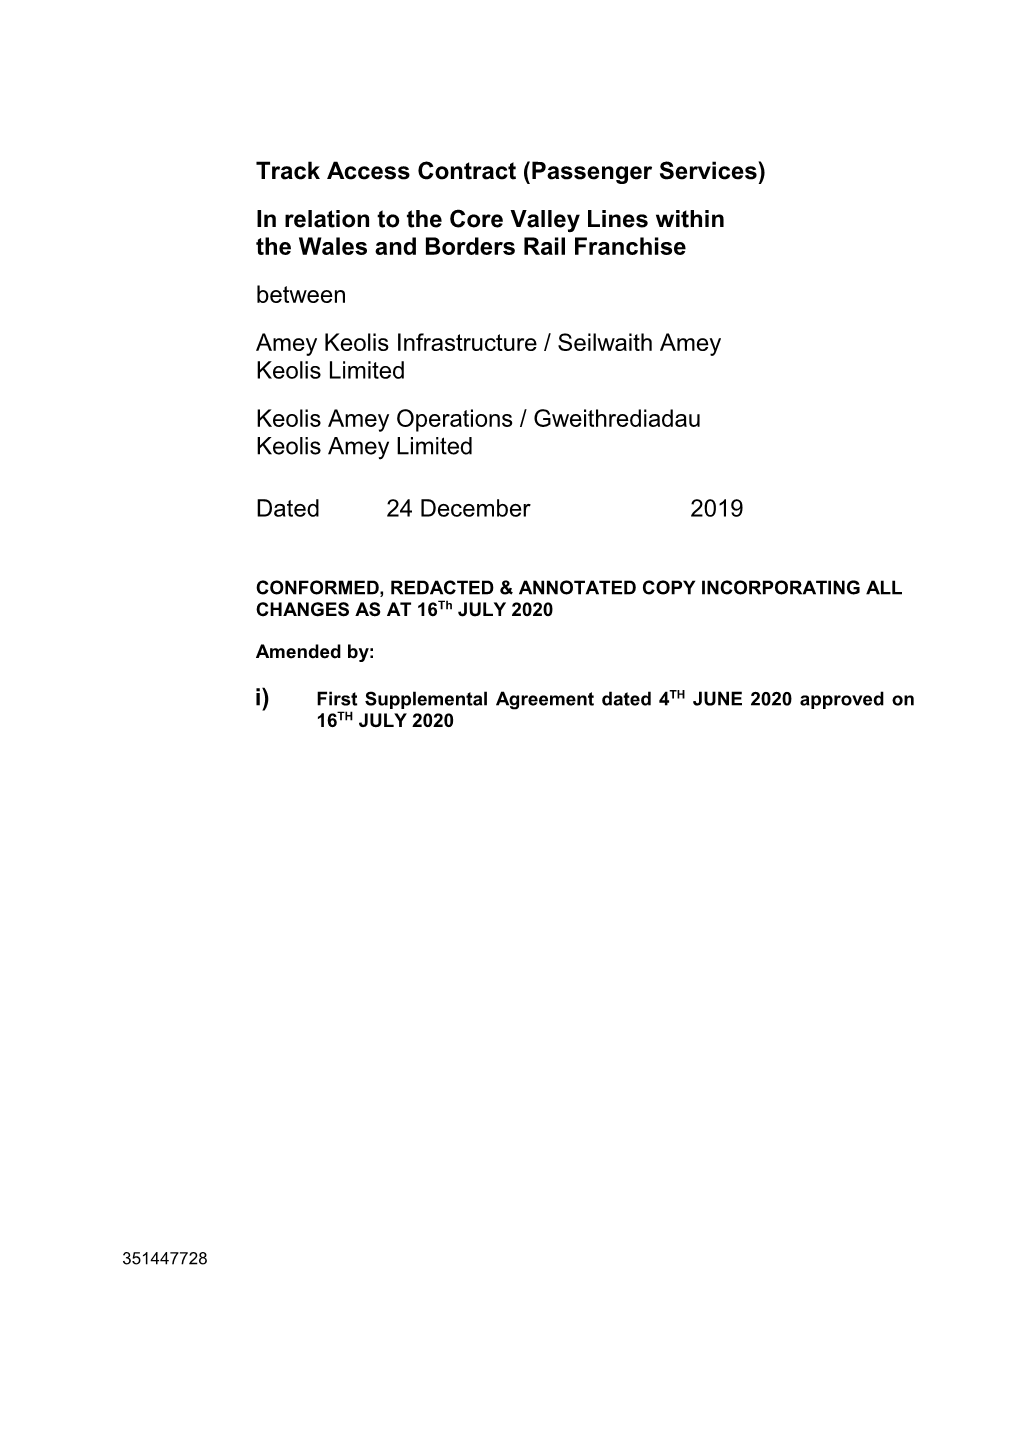 Keolis-Amey-Operations-Core-Valley-Lines-Track-Access-Agreement-2020-07-16.Pdf